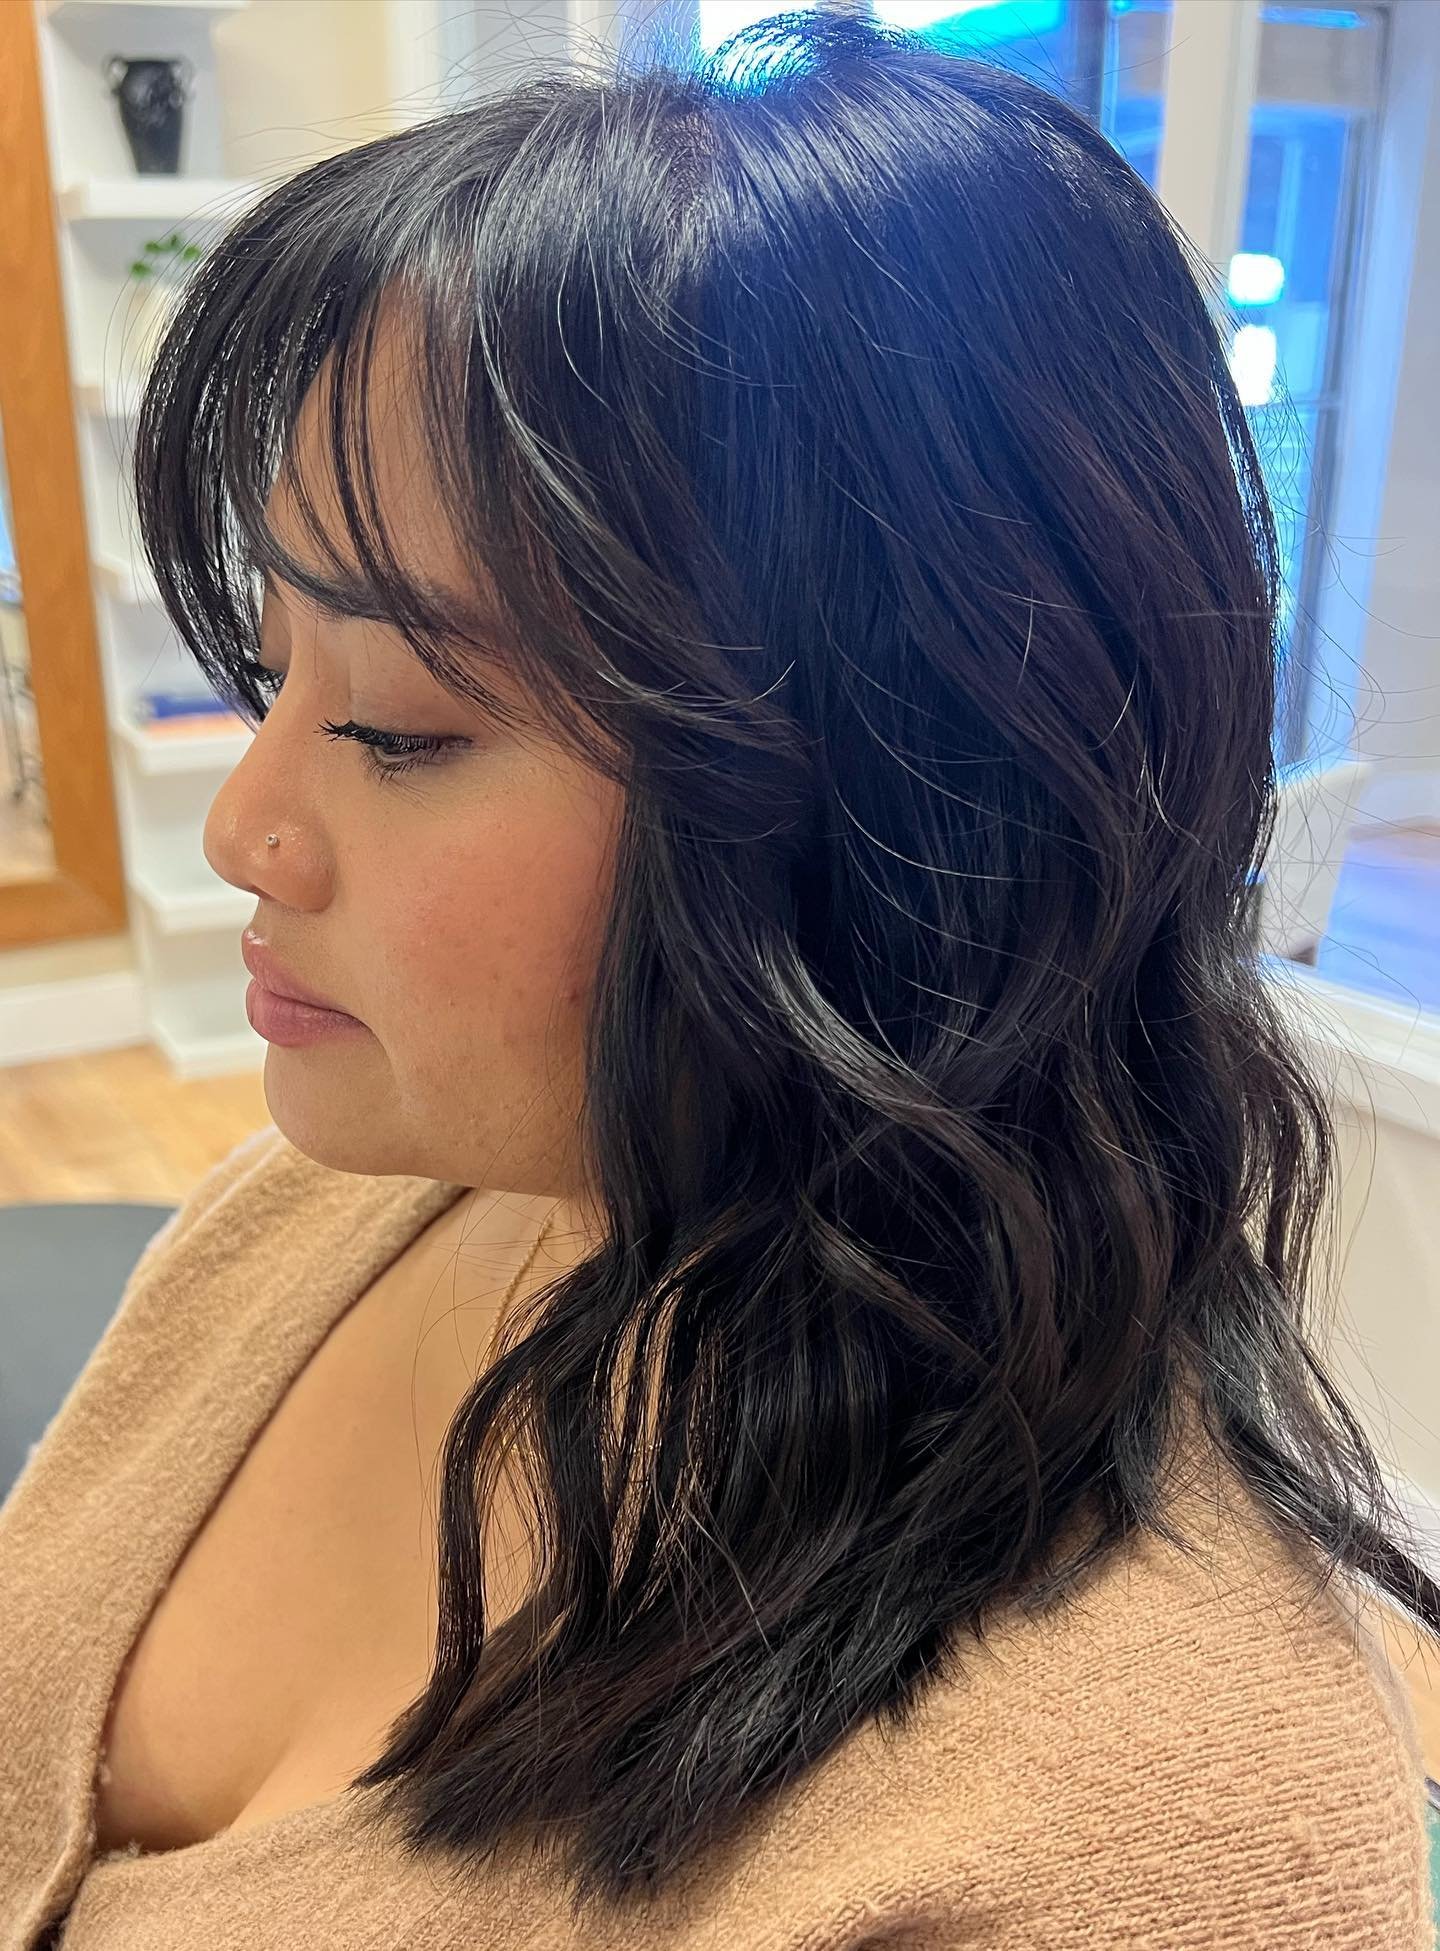 Embrace the effortless elegance of Seattle style with this before and after reveal. ✂️💁&zwj;♀️ #EffortlesslyChic #SeattleHairJourney
#SeattleHair
#SeattleHaircut
#SeattleHairstylist
#SeattleSalon
#SeattleBeauty
#SeattleHairGoals
#SeattleGirlsHair
#S